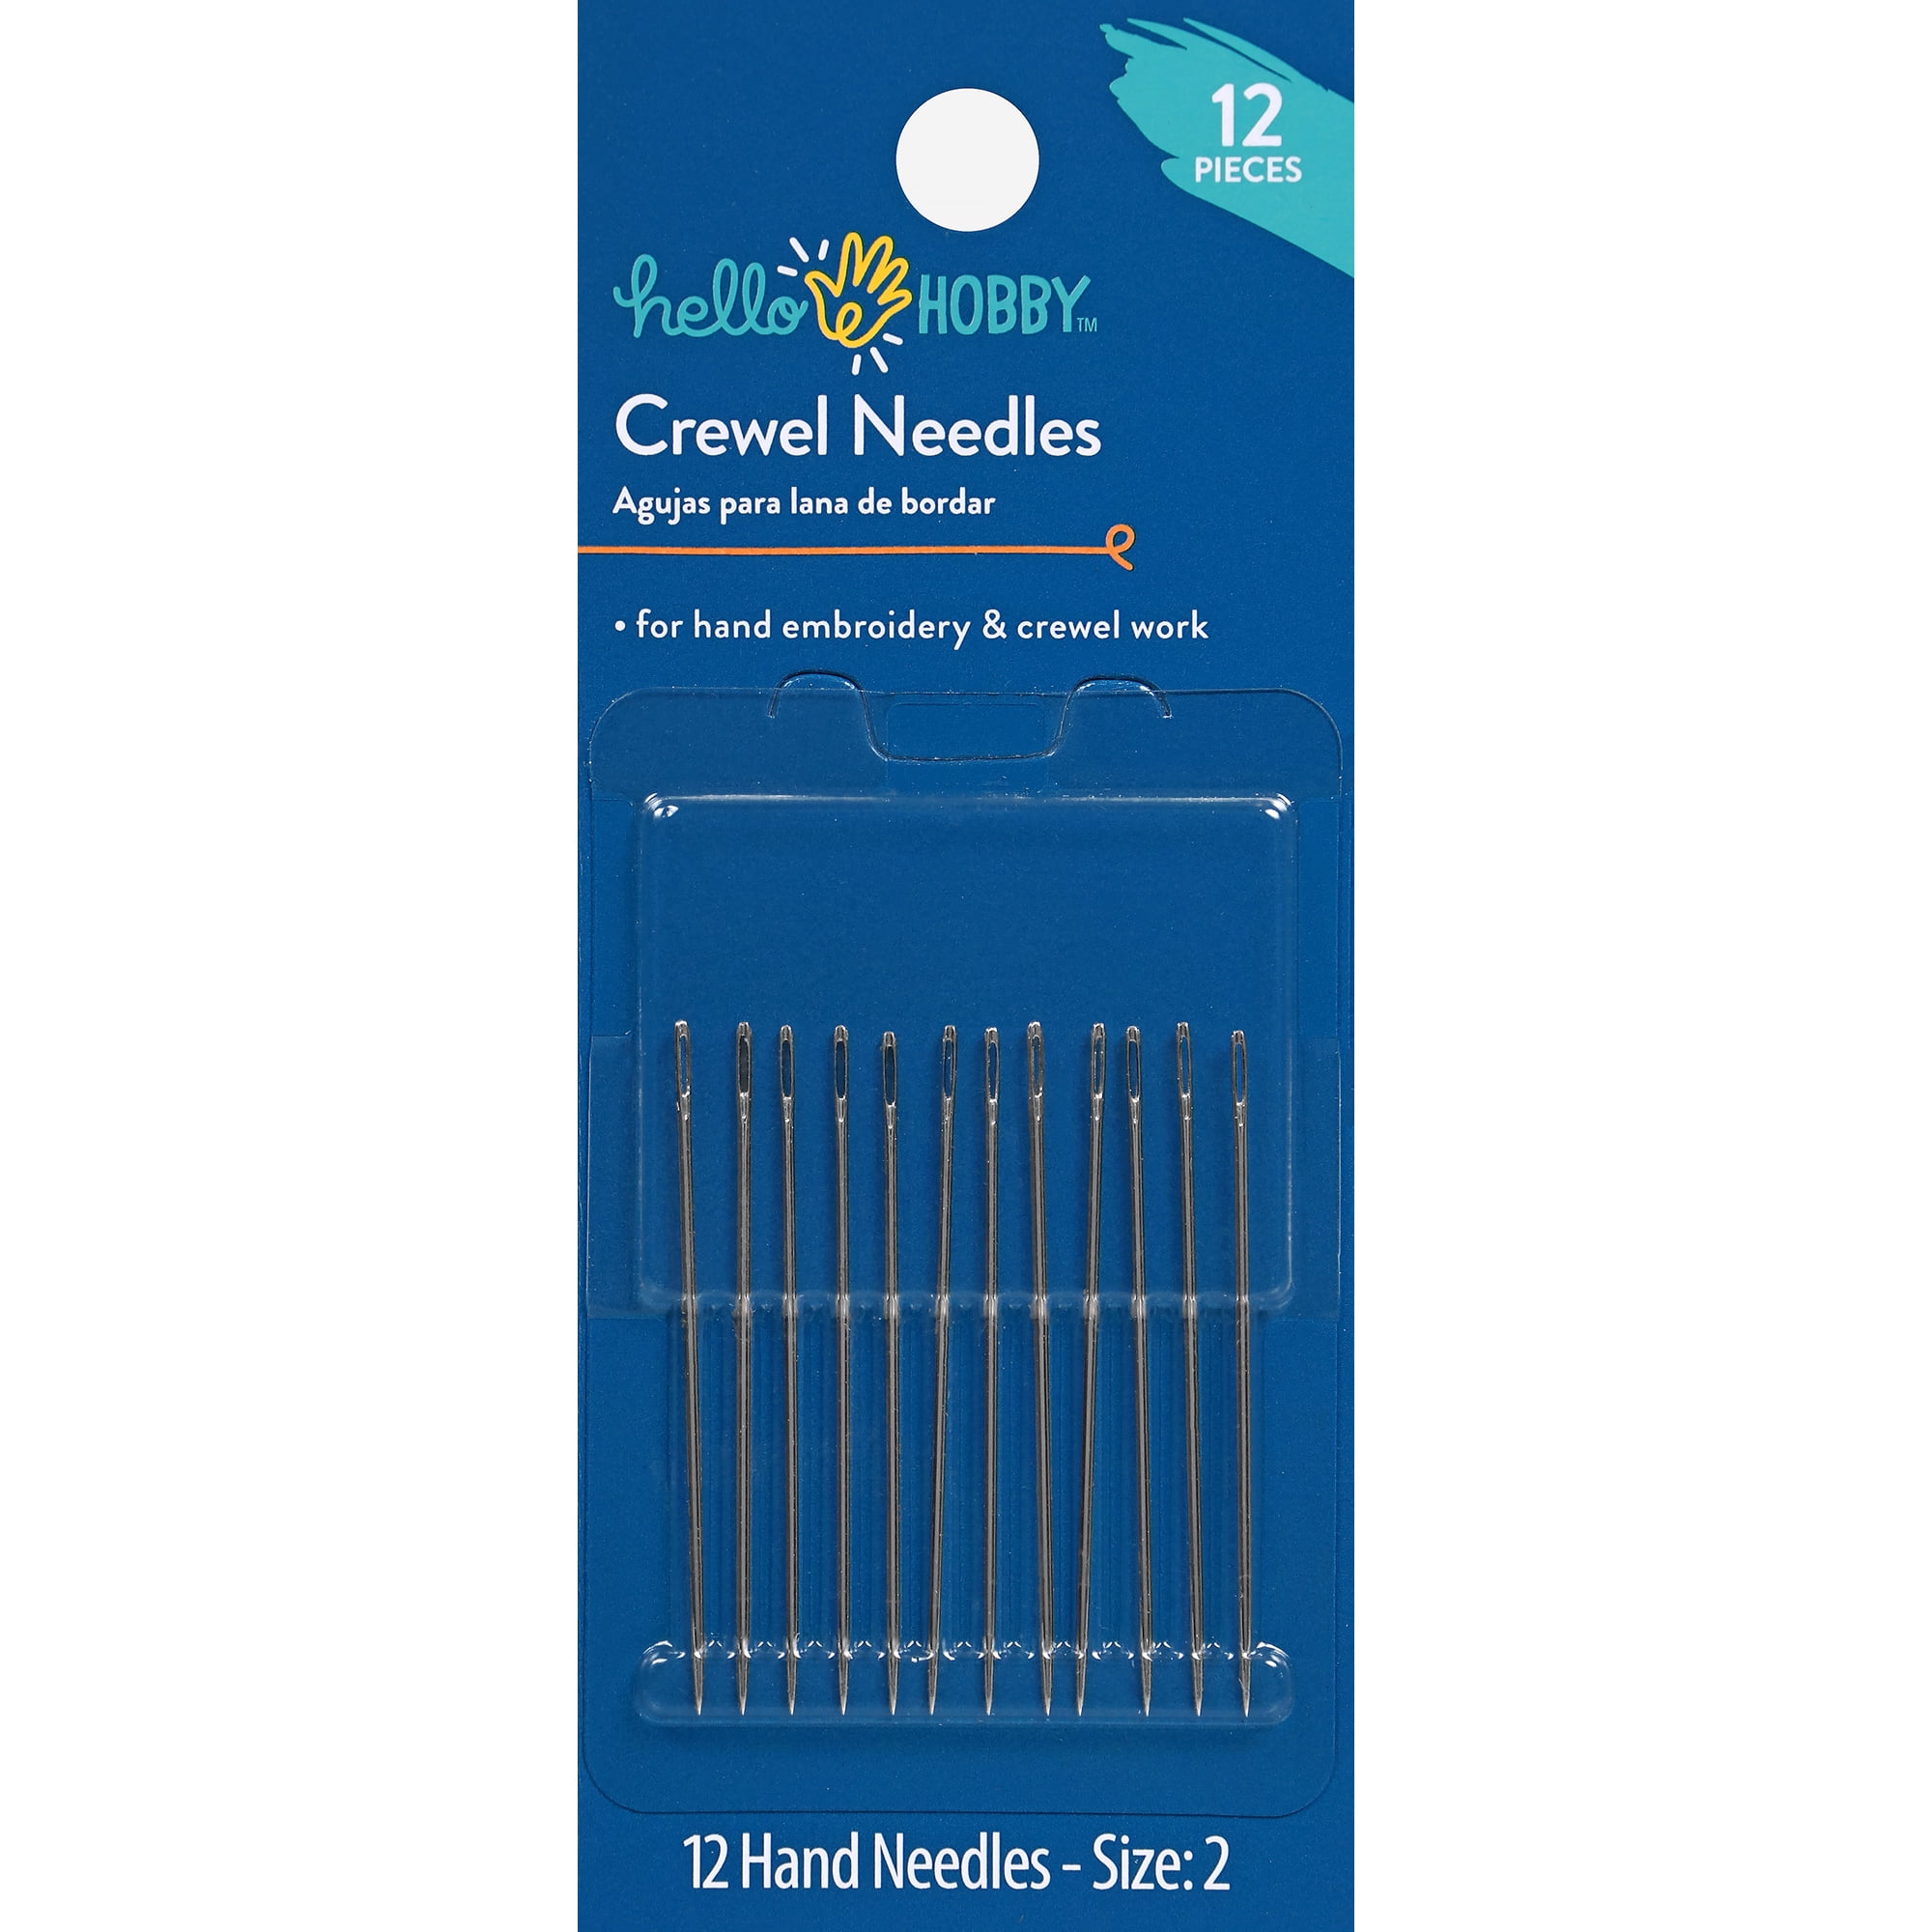 Dritz Quilting Curved Needles 4/Pkg-Size 2 inch & 2.5 inch